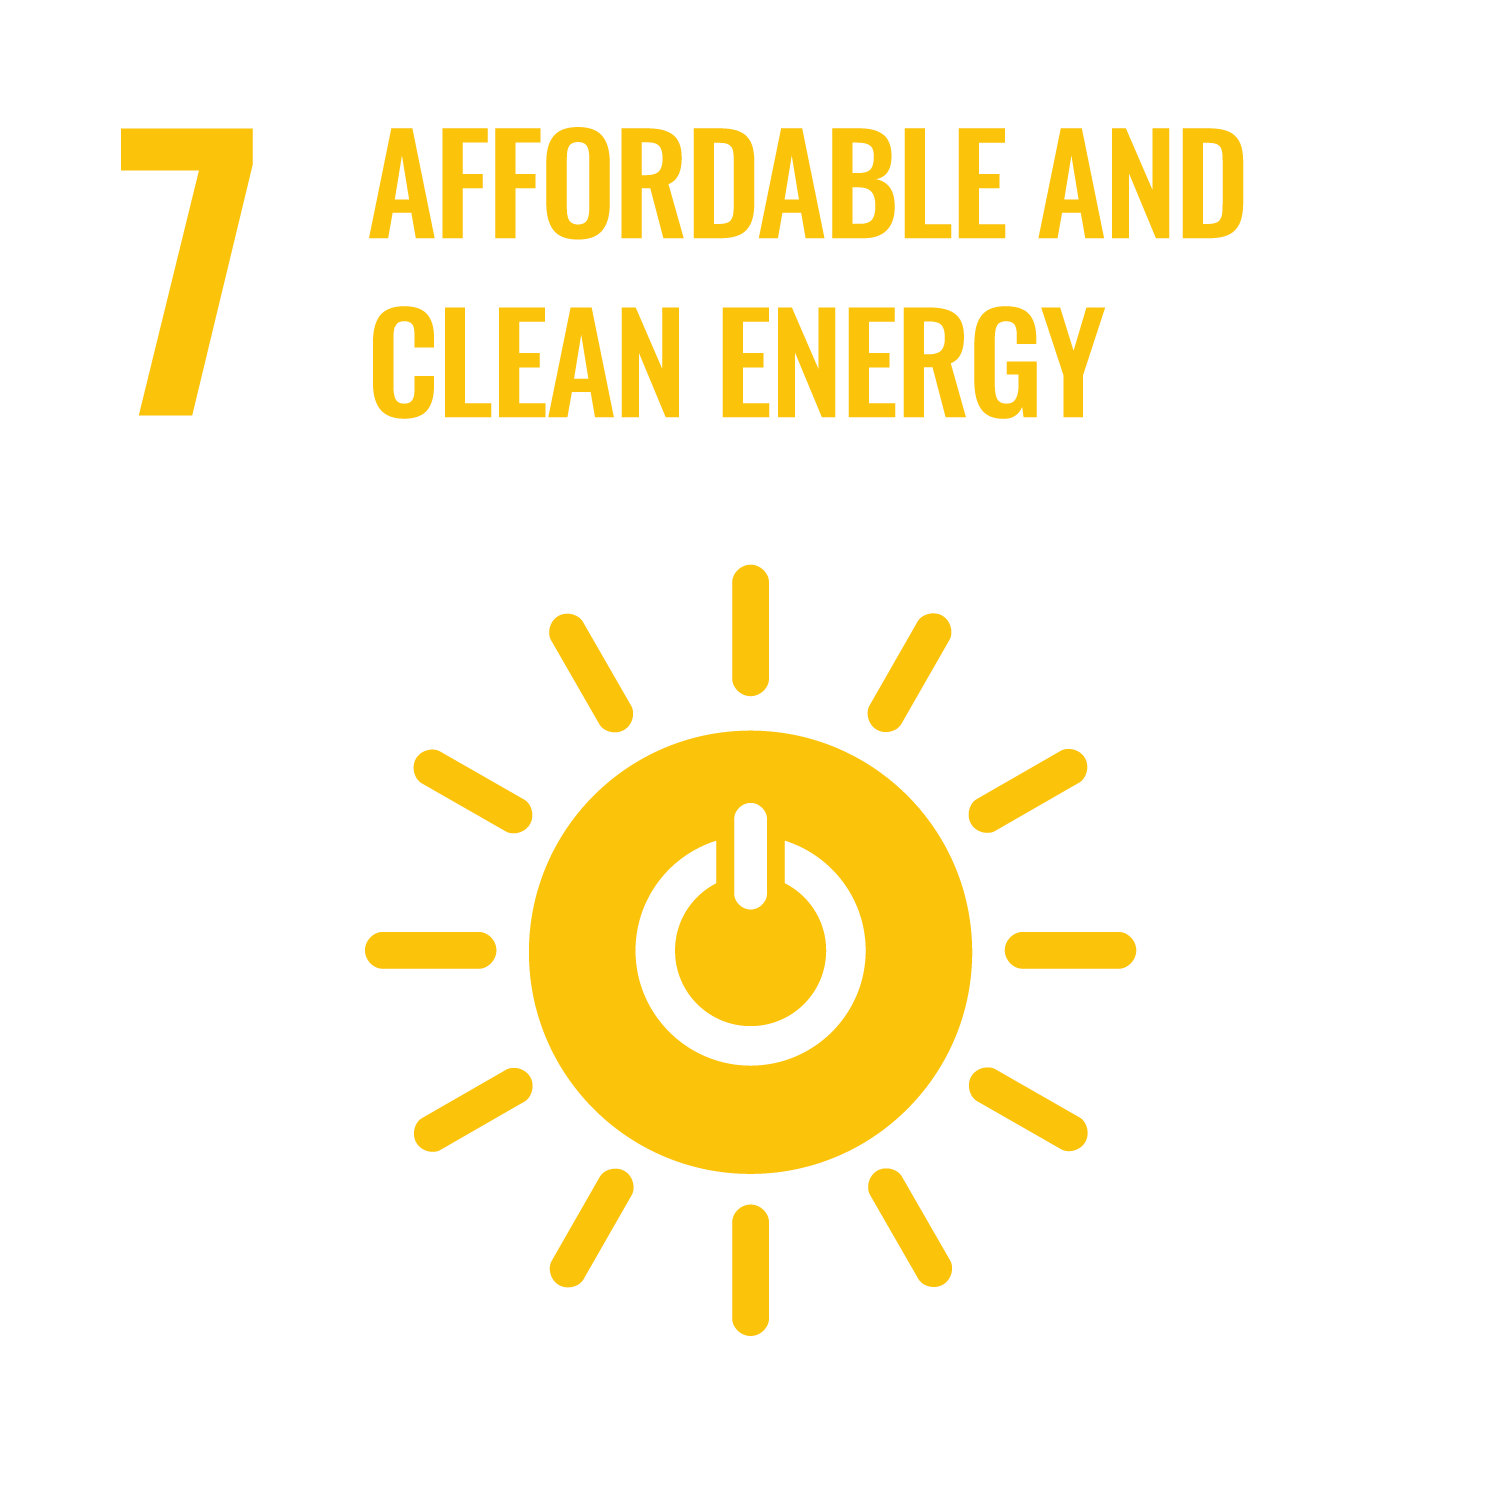 Image for Affordable and Clean Energy Sustainable Development Goal